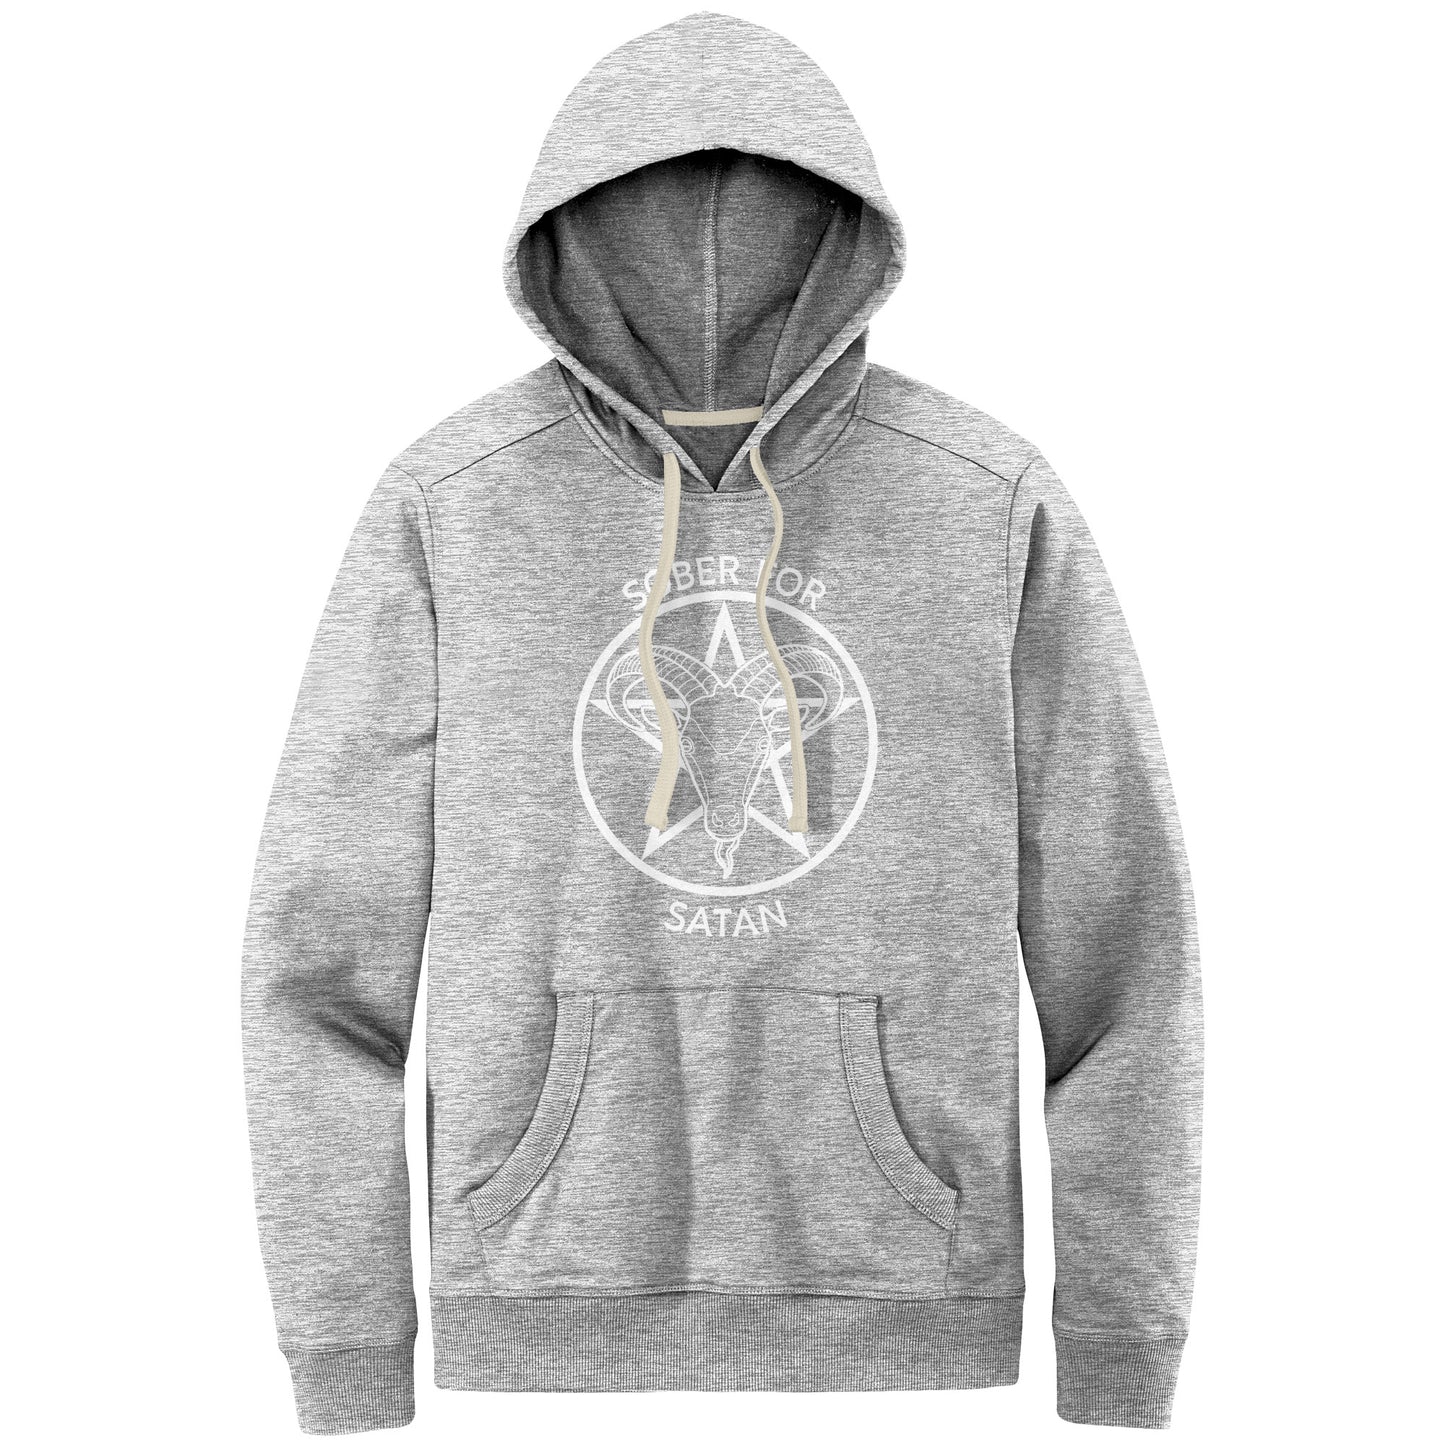 Sober for Satan Relaxed Fit Re-Fleece Hoodie